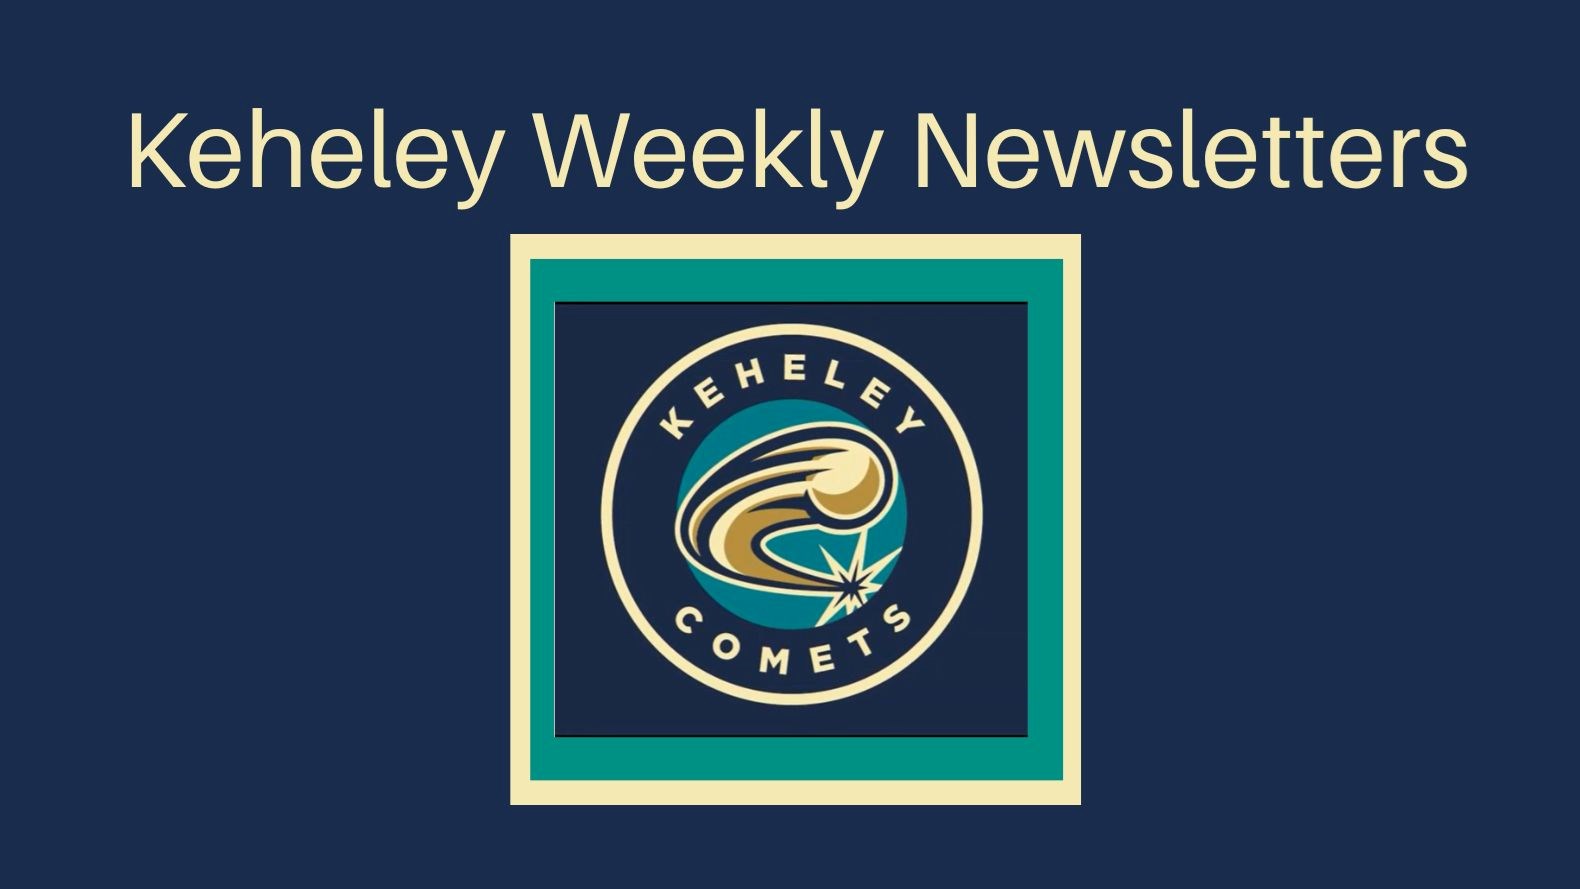 Keheley Weekly Newsletter with Comets logo on navy blue background